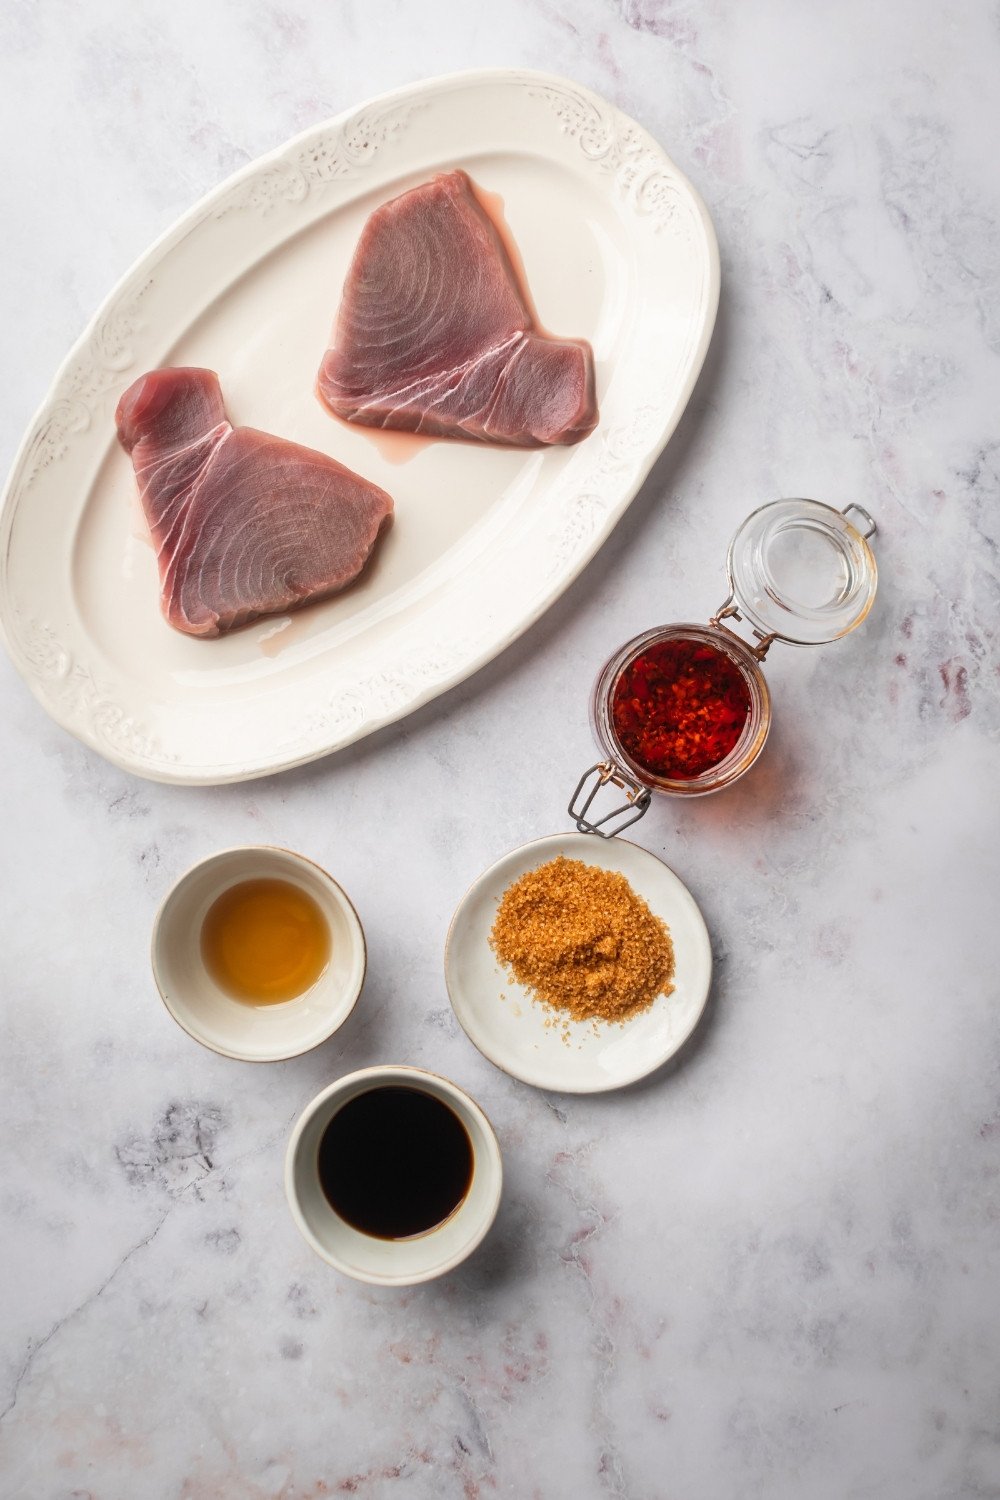 White plate with two tuna steaks on it, a bowl of sesame oil, a bowl of soy sauce, a small white plate with brown sugar on it, and a glass jar with chili flakes in it on a grey counter.